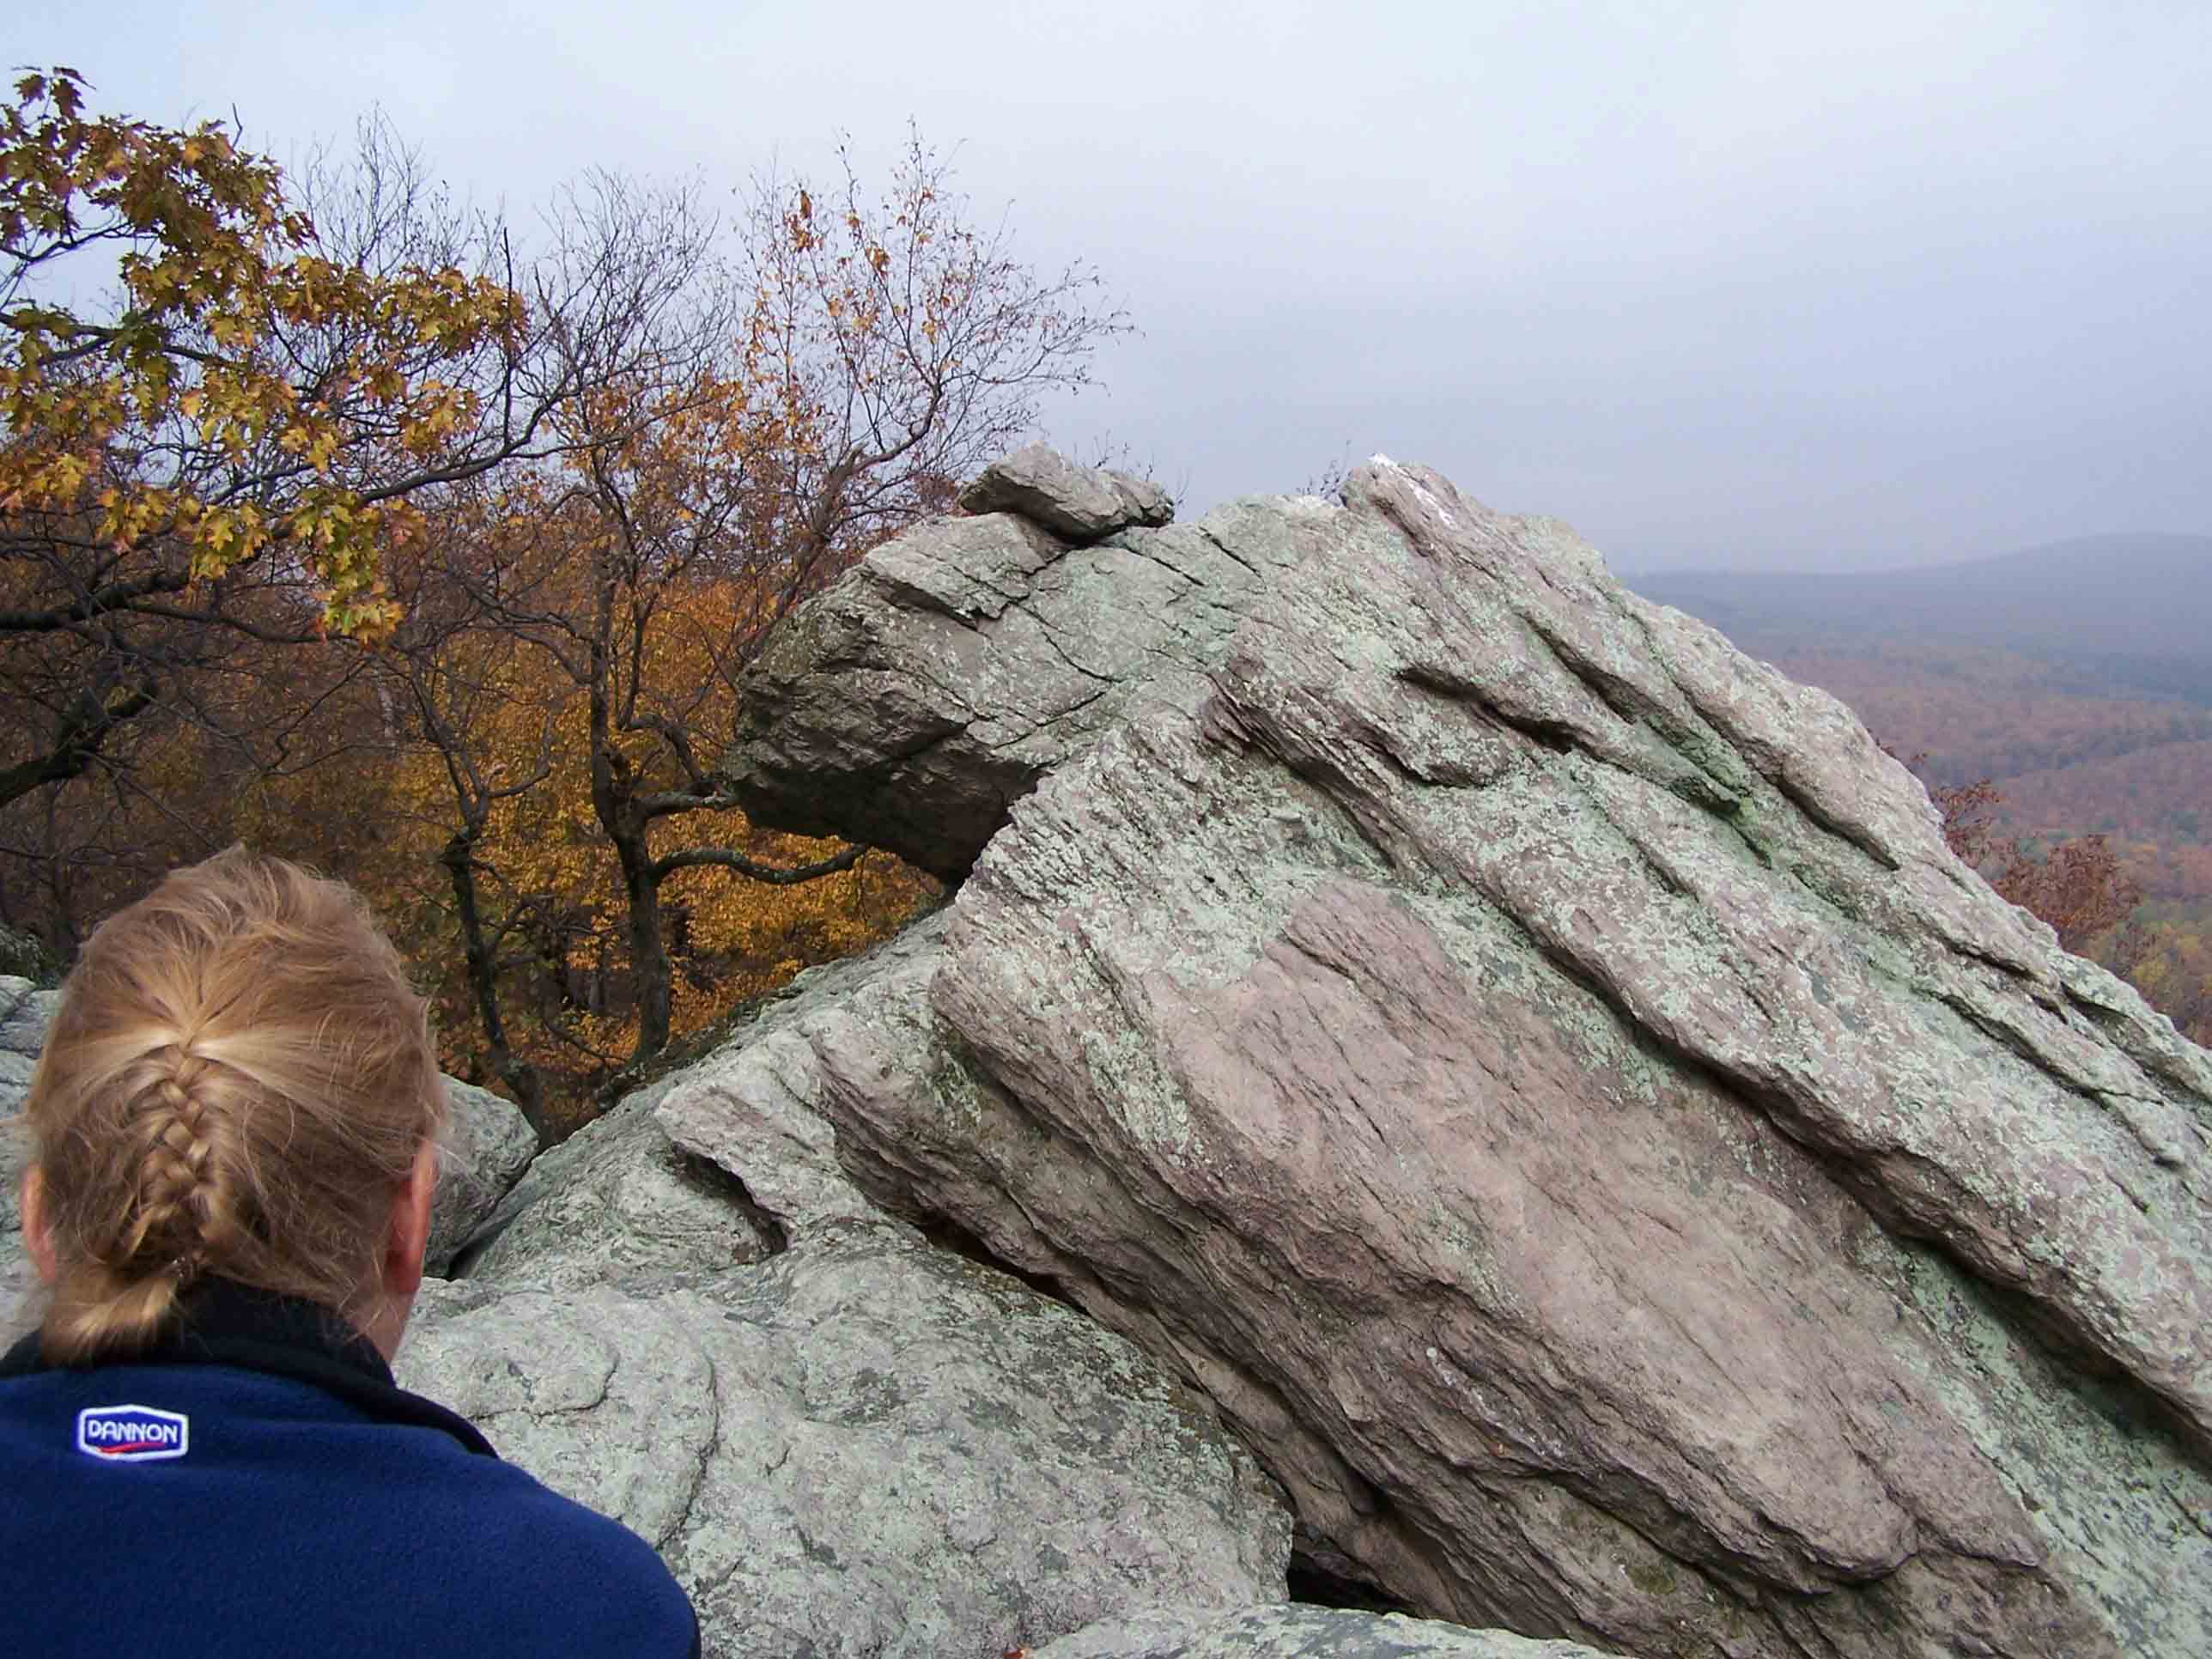 View from Chimney Rocks. Courtesy at@rohland.org